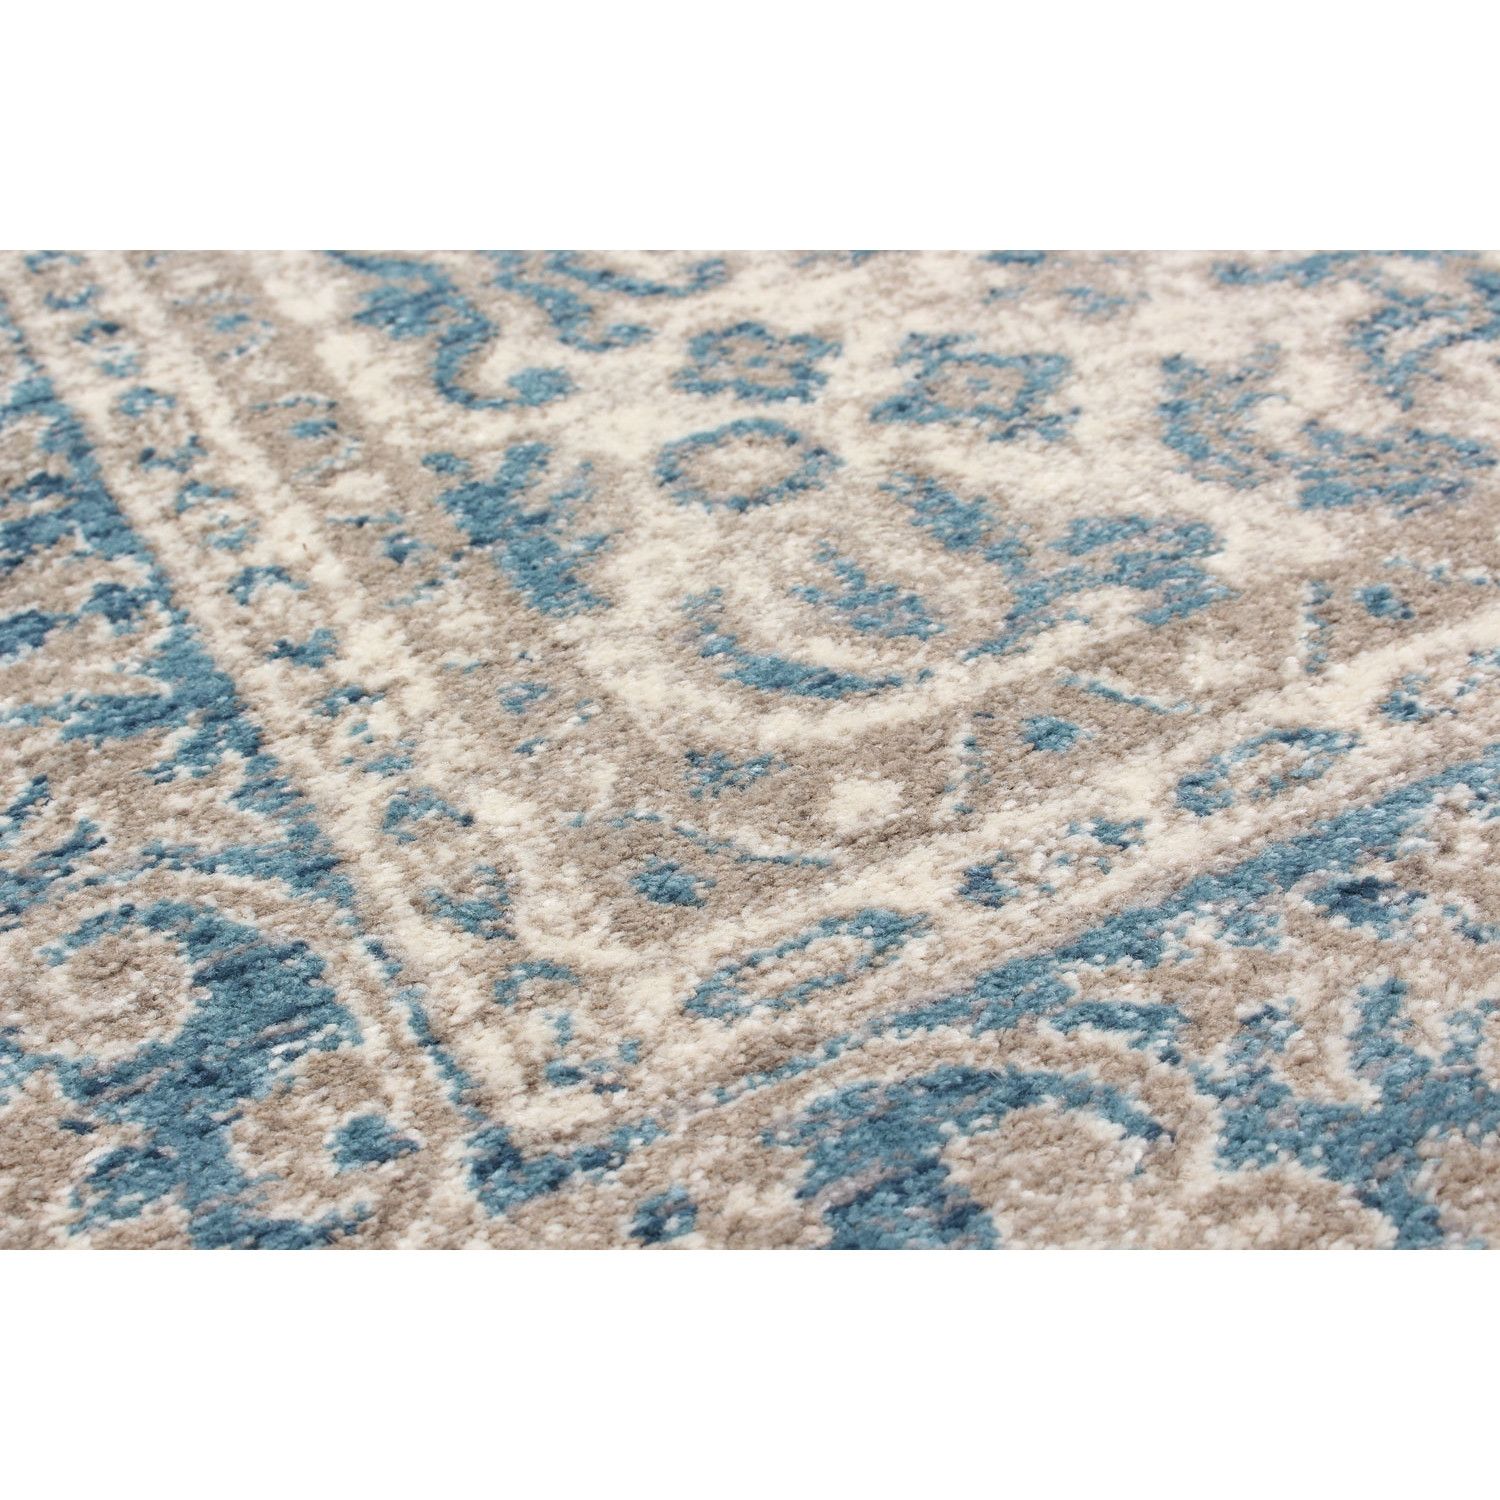 Rugs 8×10 Area Rugs Cheap Cheap Area Rug Jcpenney Area Rugs With Cheap Wool Area Rugs (View 8 of 15)